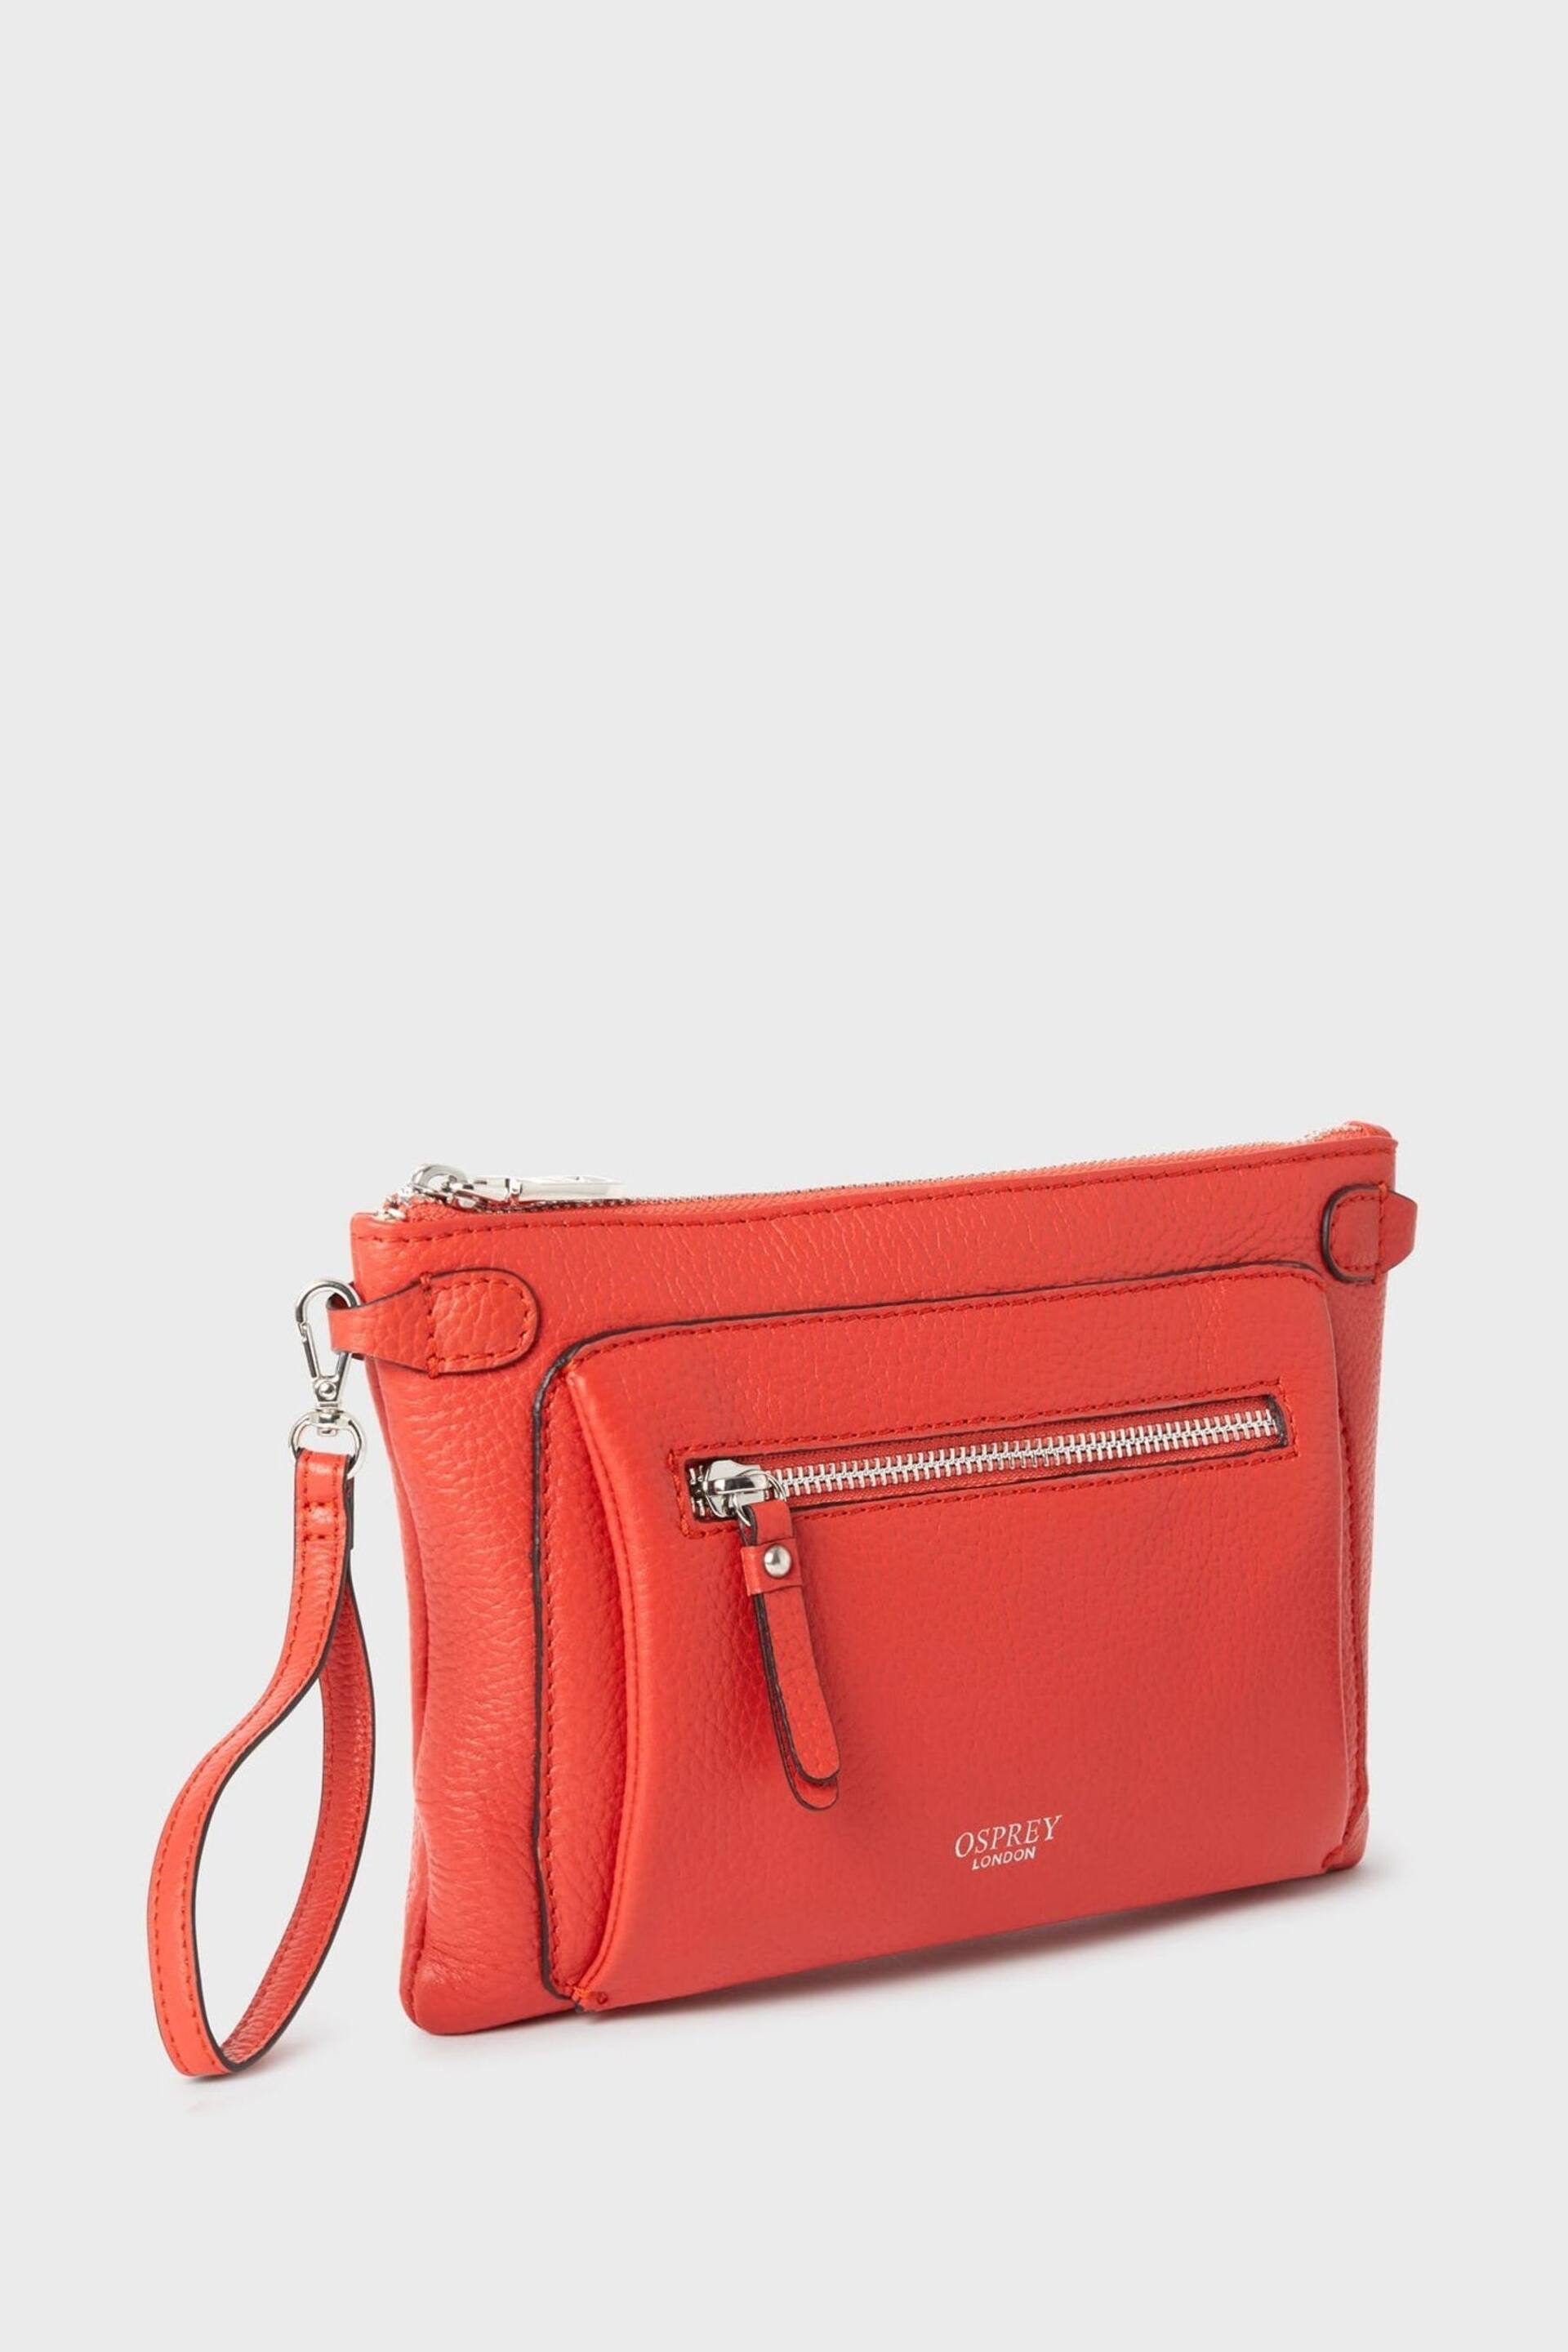 OSPREY LONDON The Ruby Leather Cross-Body Bag - Image 4 of 5